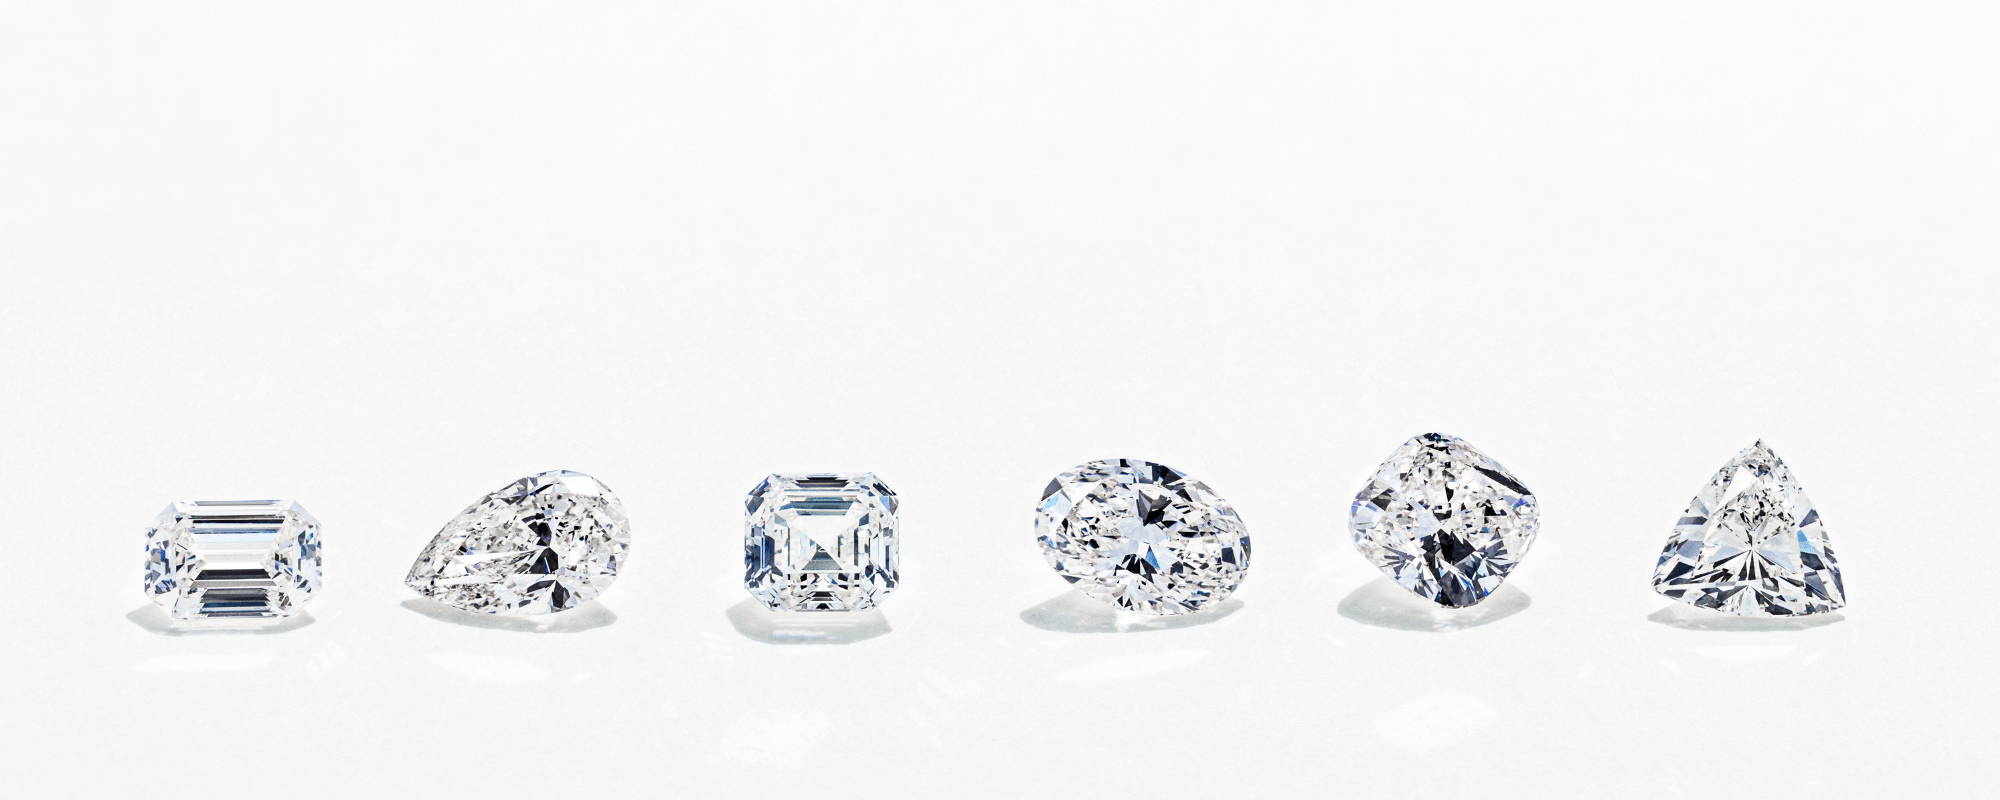 Introducing a New Level of Sustainable Diamonds: Aether Diamonds